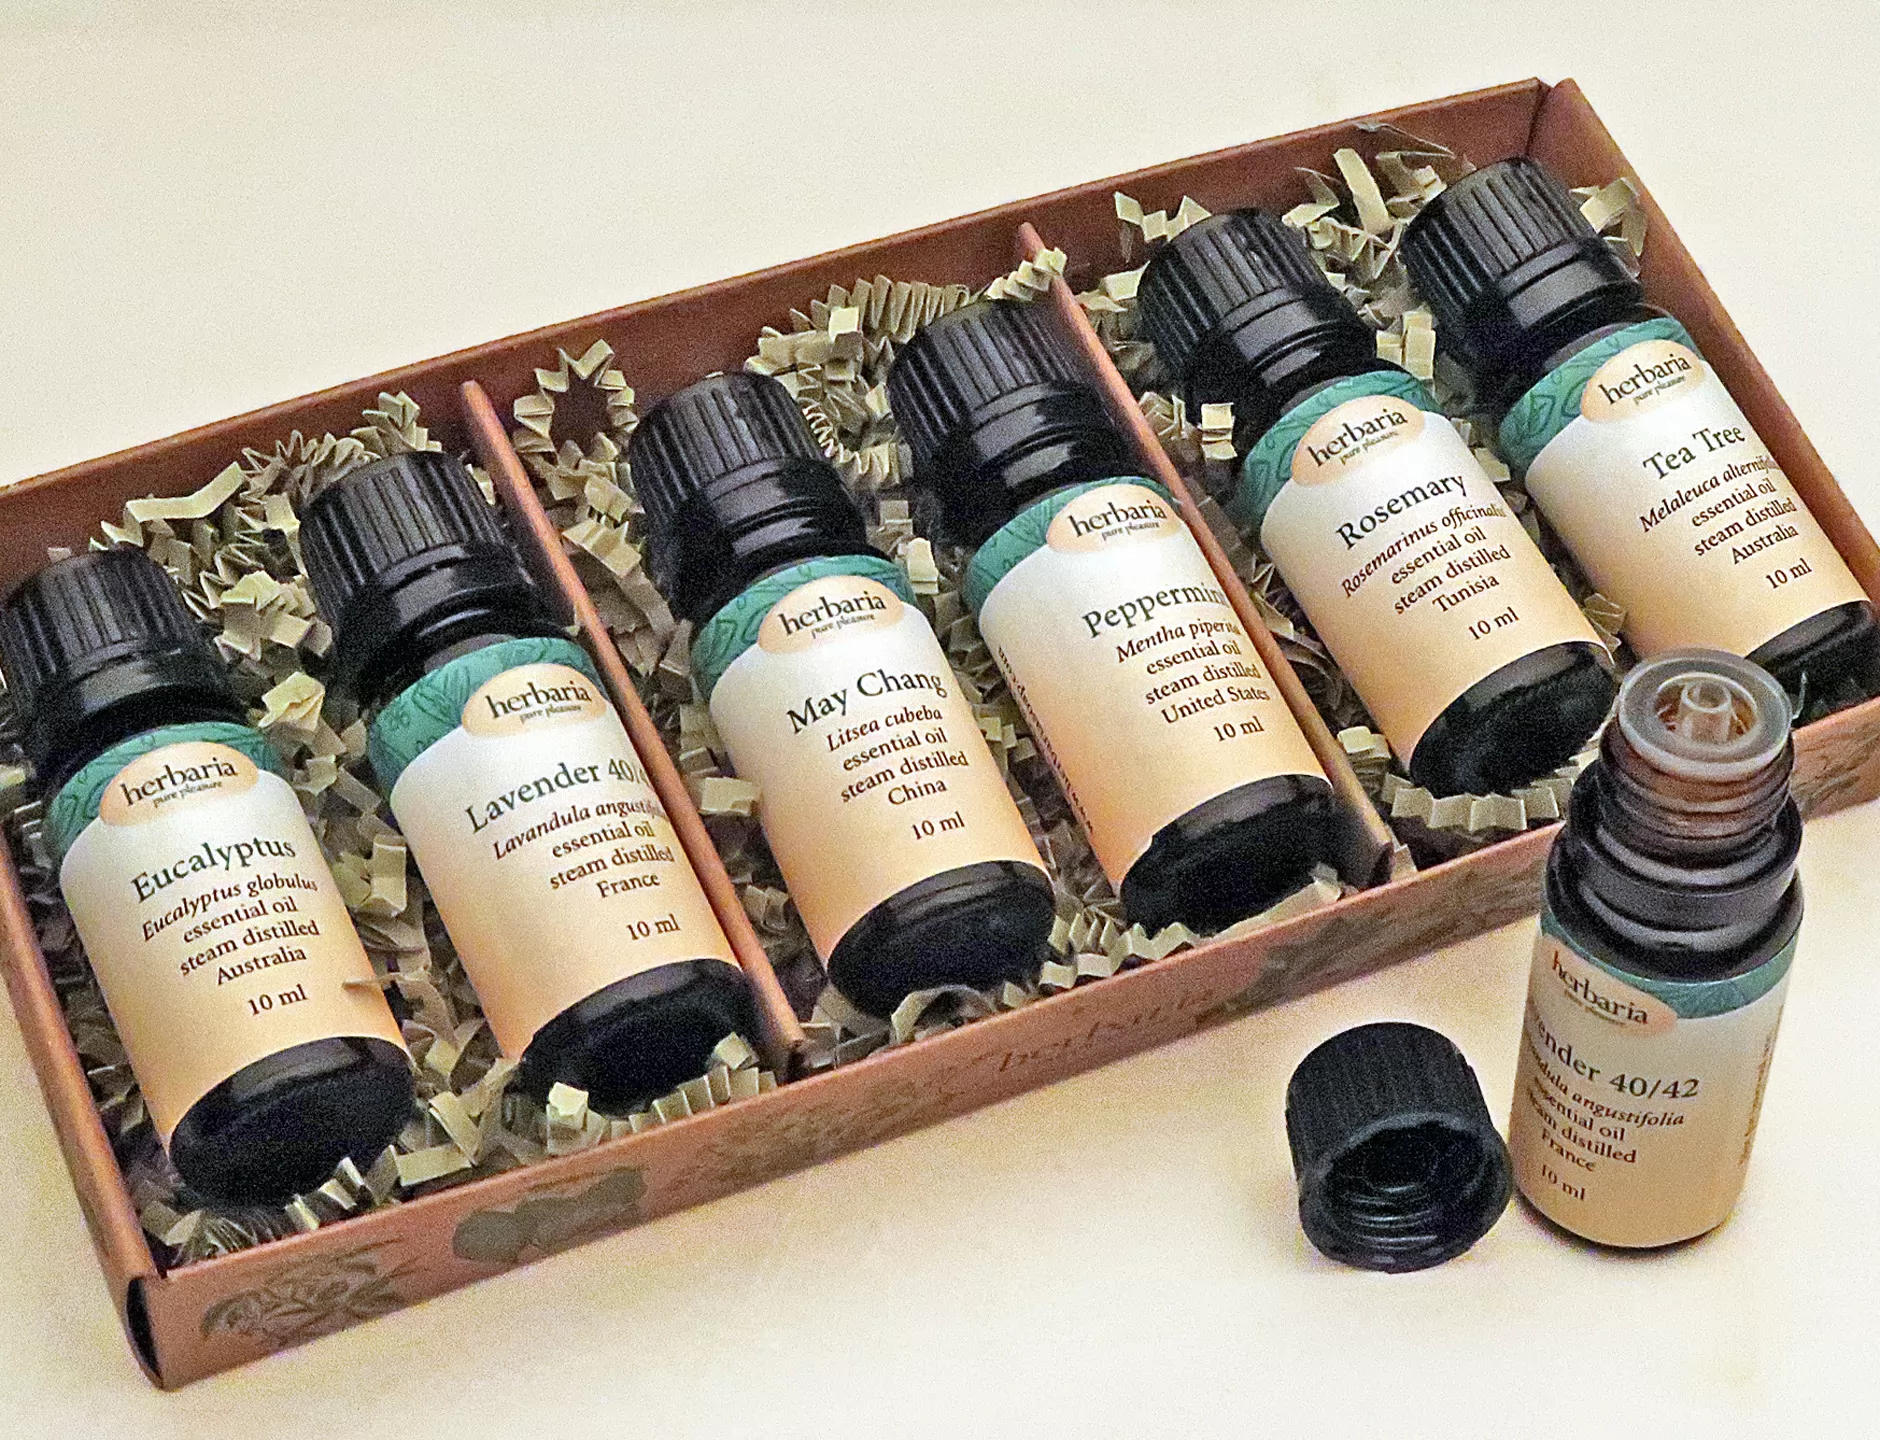 Lefleuria Essential Oil Kit The Apothecary Collection 12 bottle